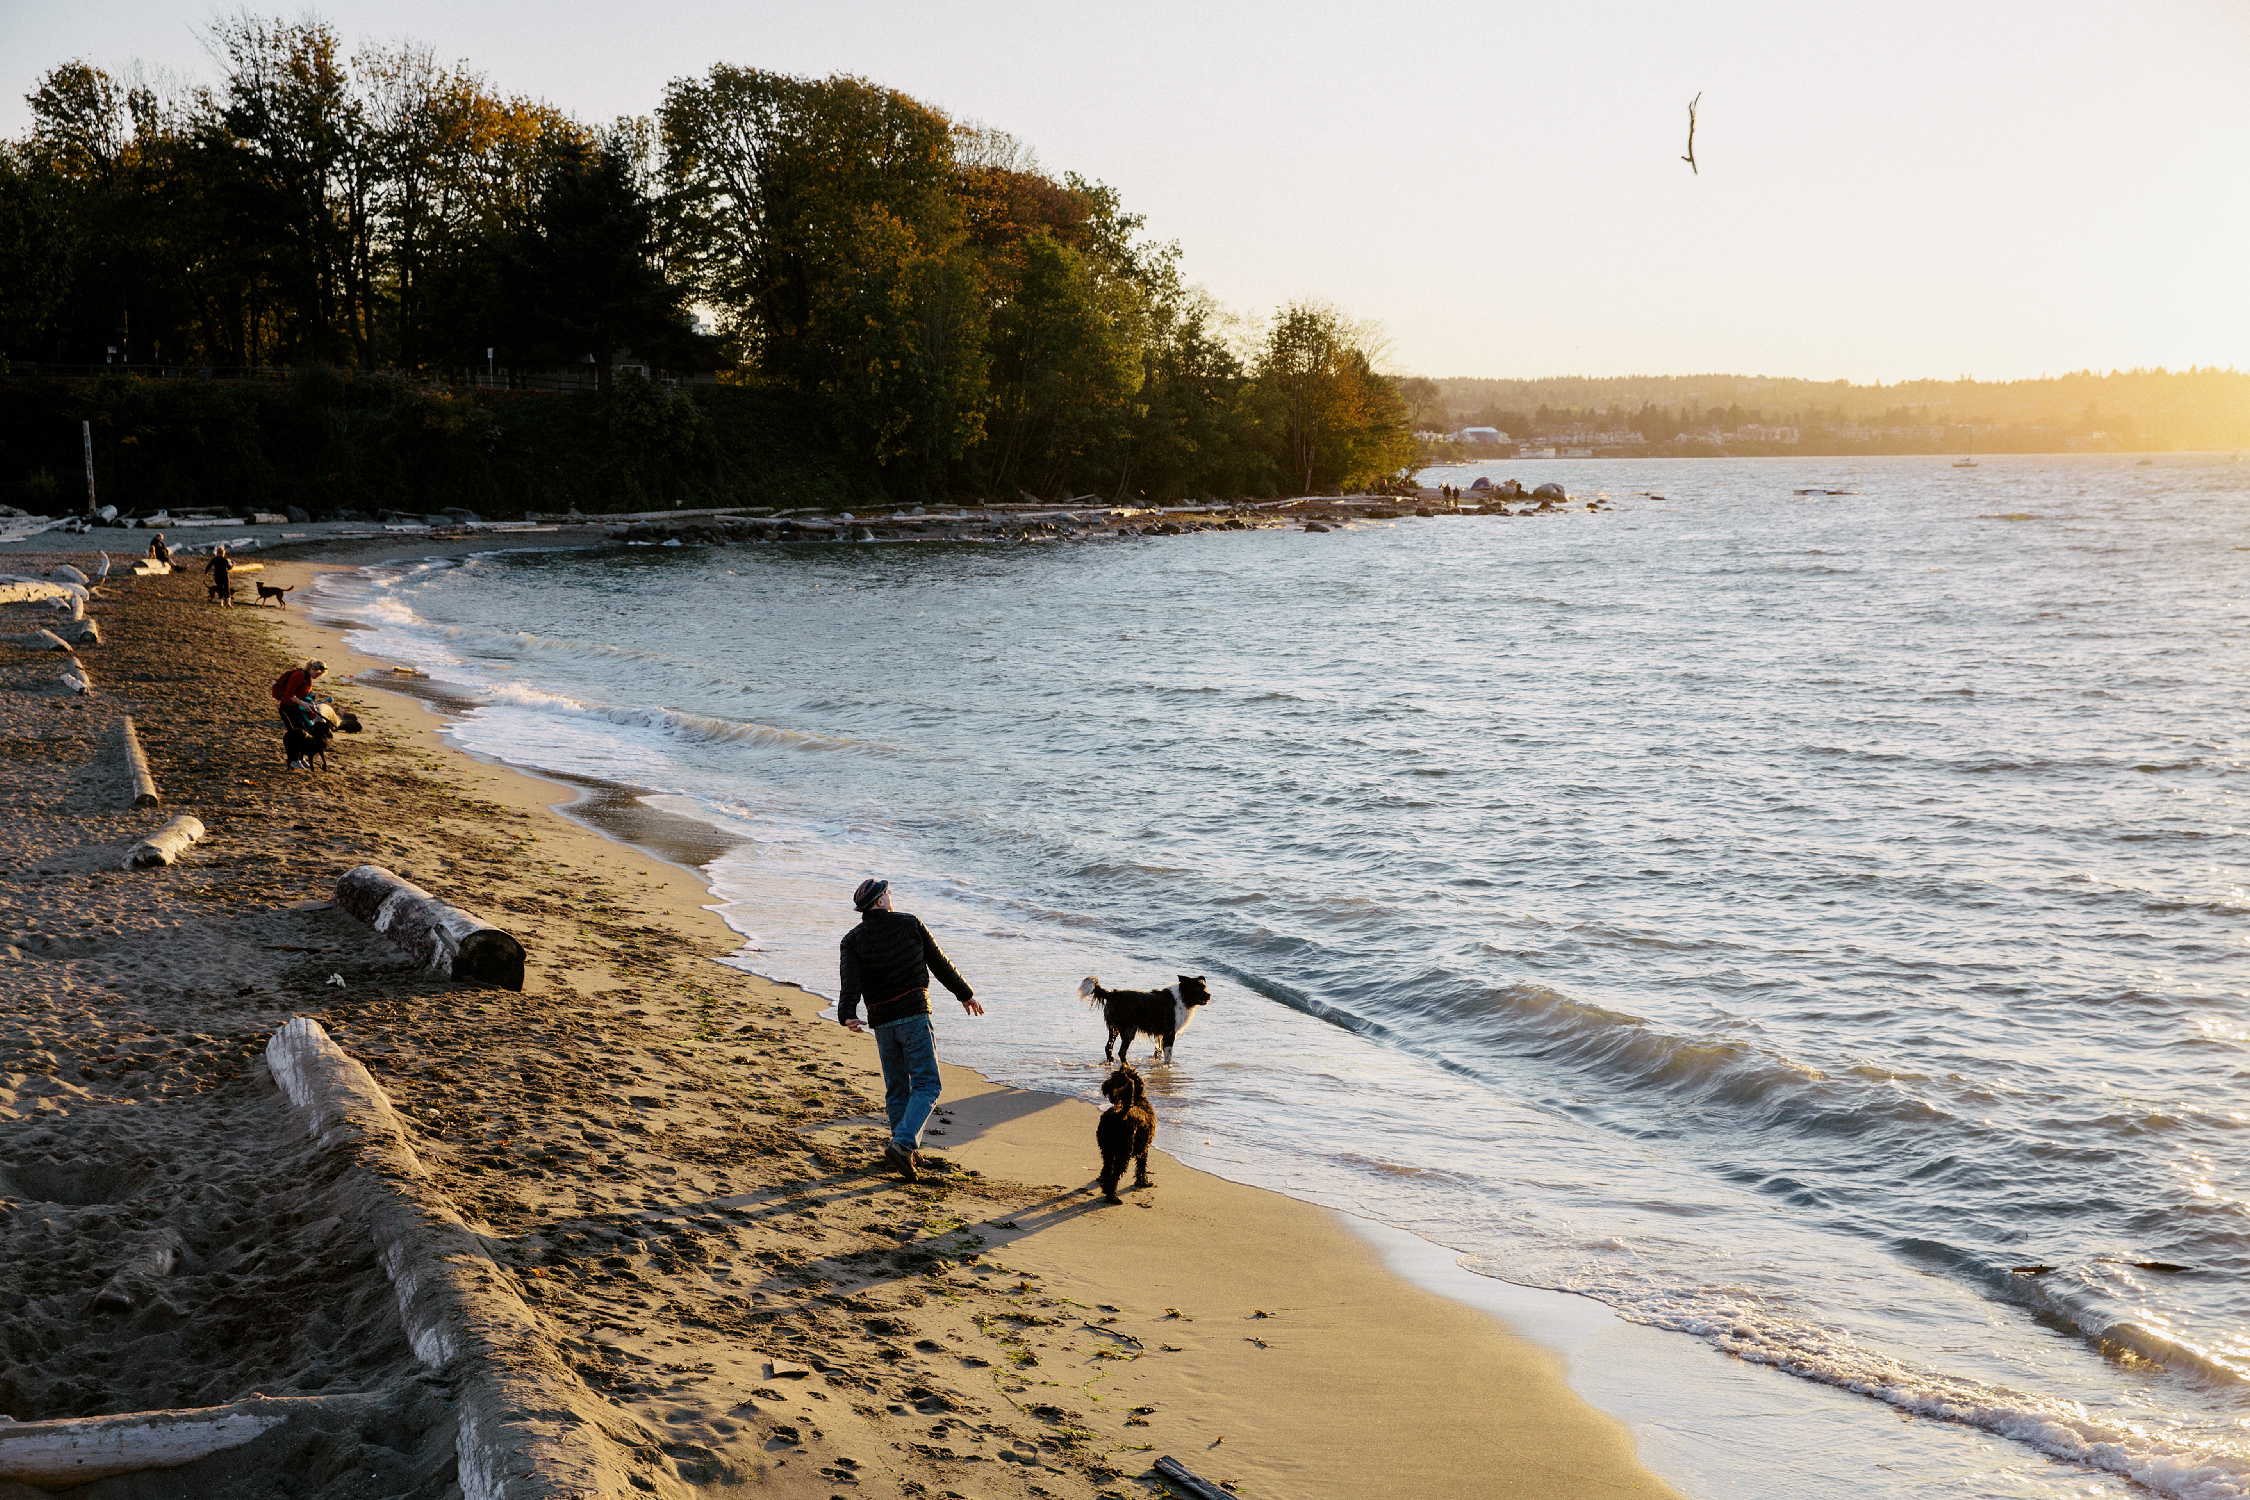 A person walks their dogs at Hadden Park Dog Beach in Kitsilano. The sun is setting over the ocean and the waves roll onto the sandy beach.